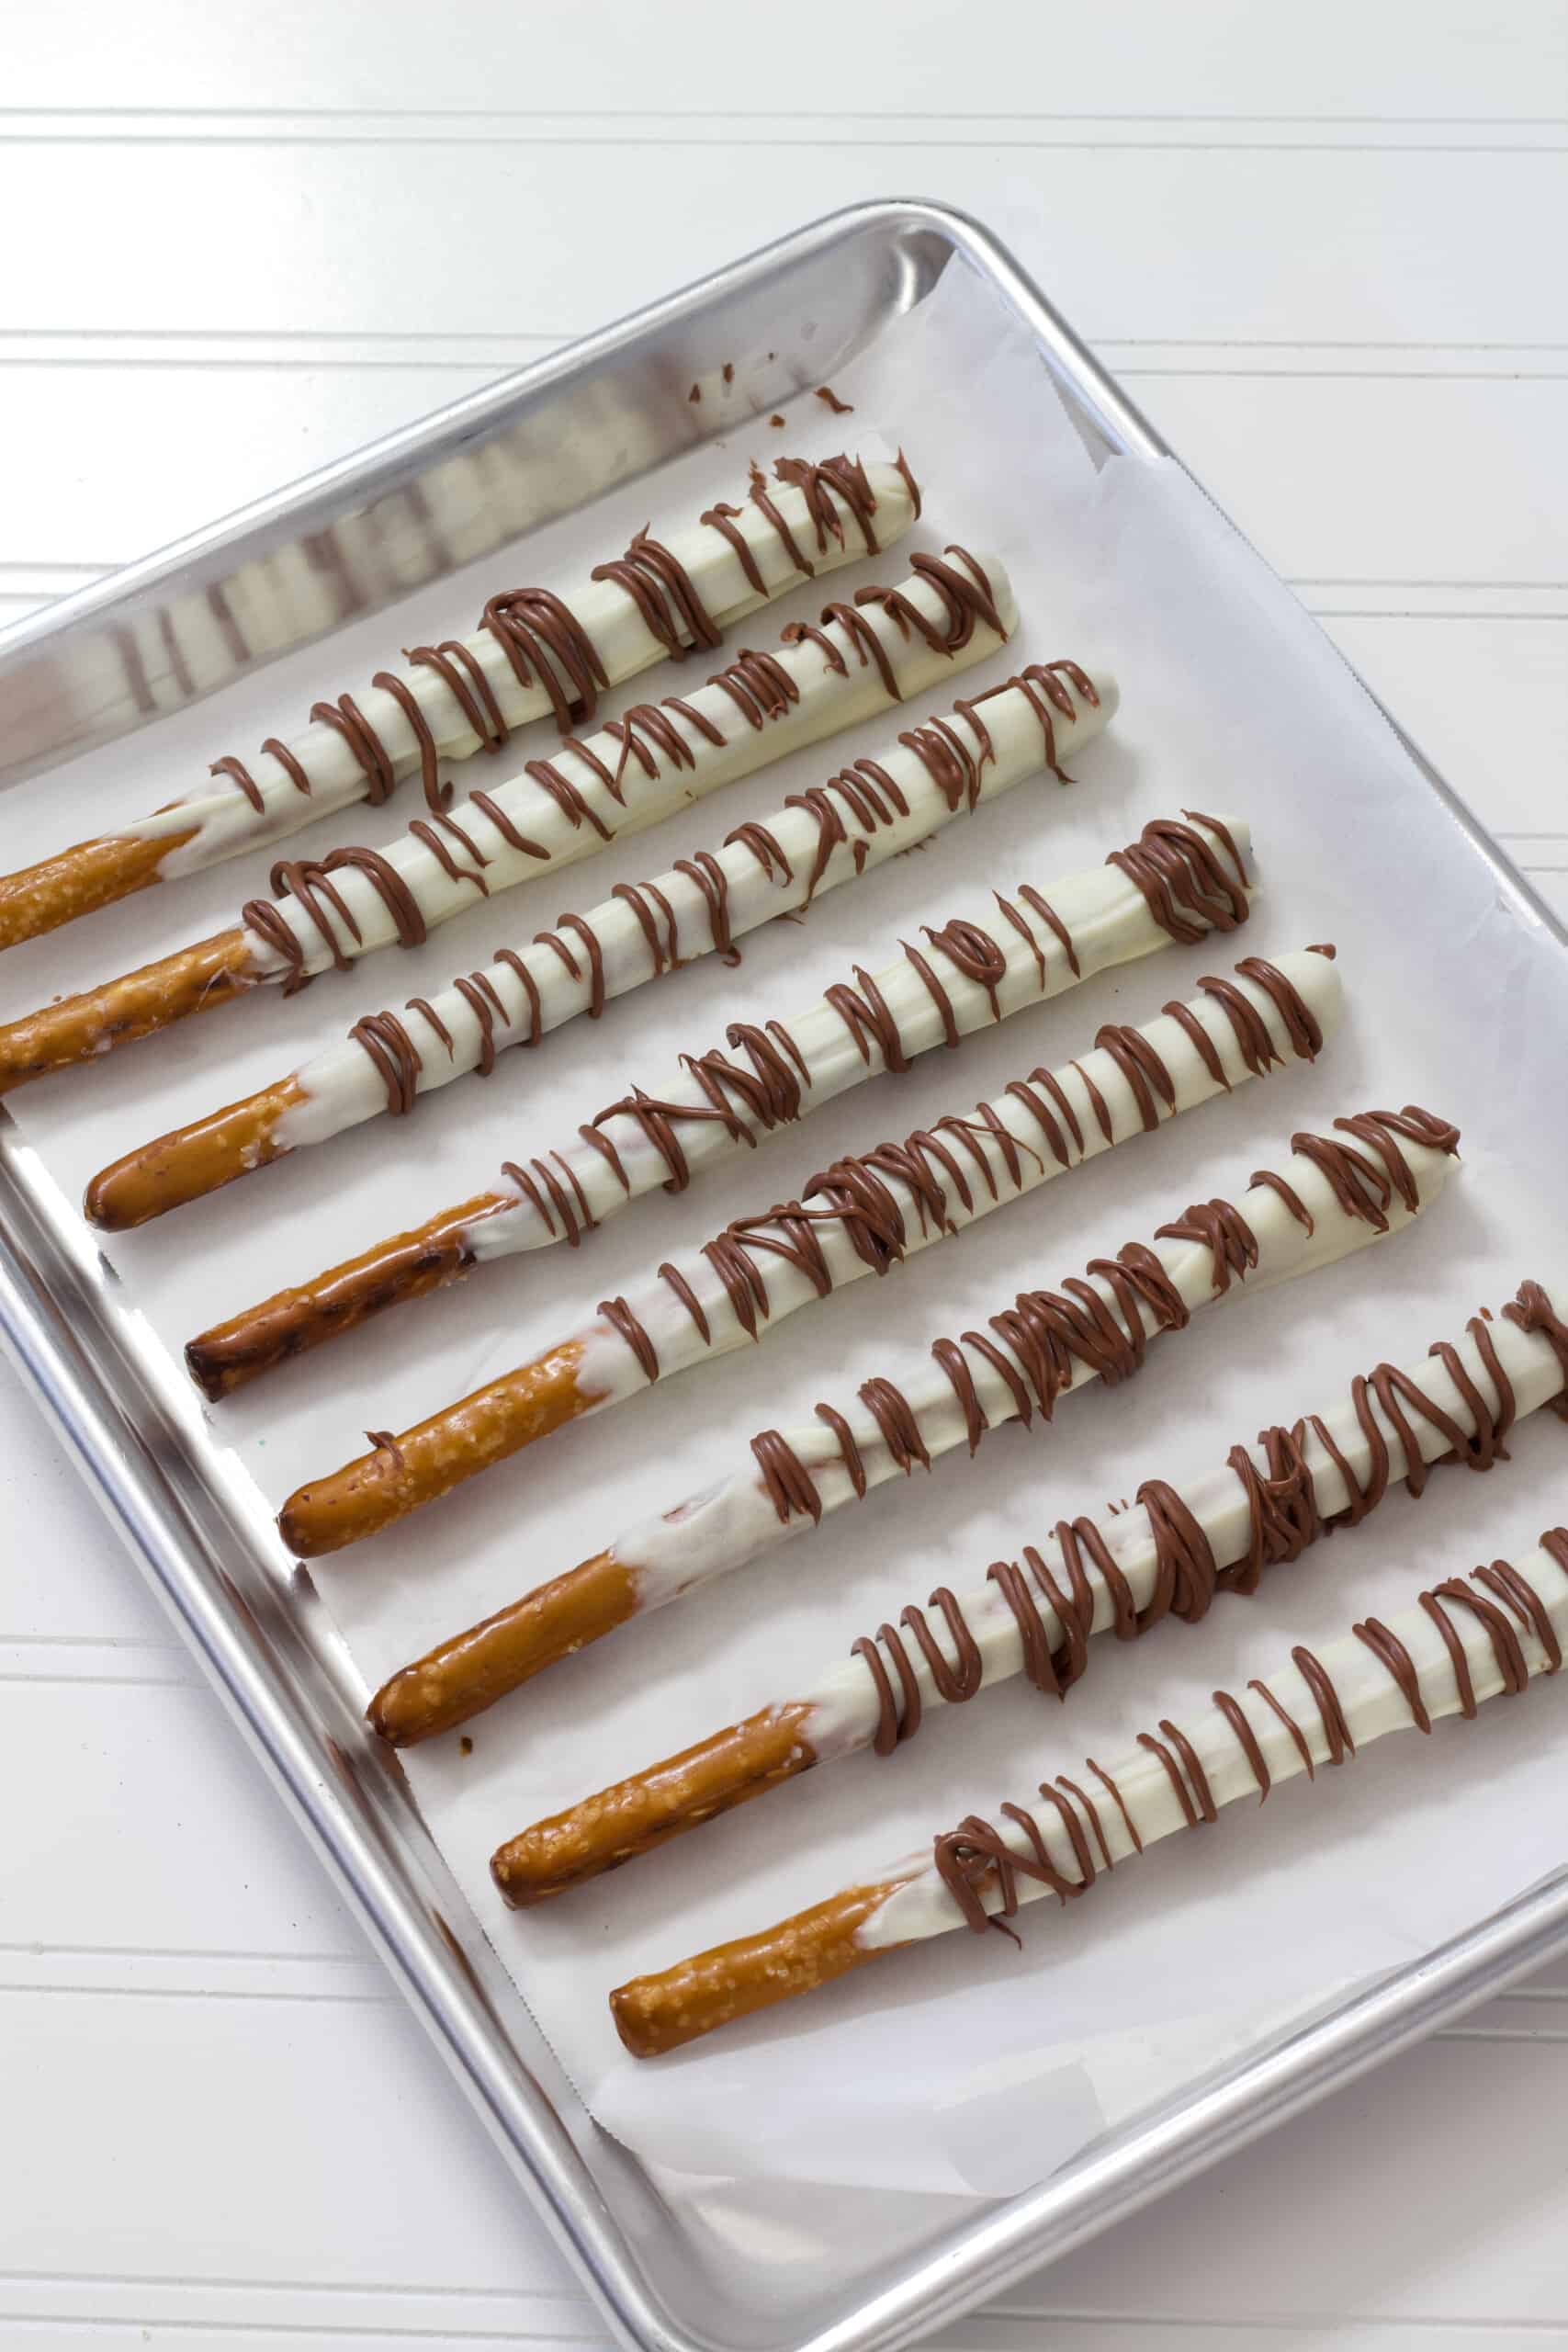 A silver sheet pan lined with white parchment paper that has several pretzel rods that have been dipped in white chocolate and drizzled with milk chocolate.